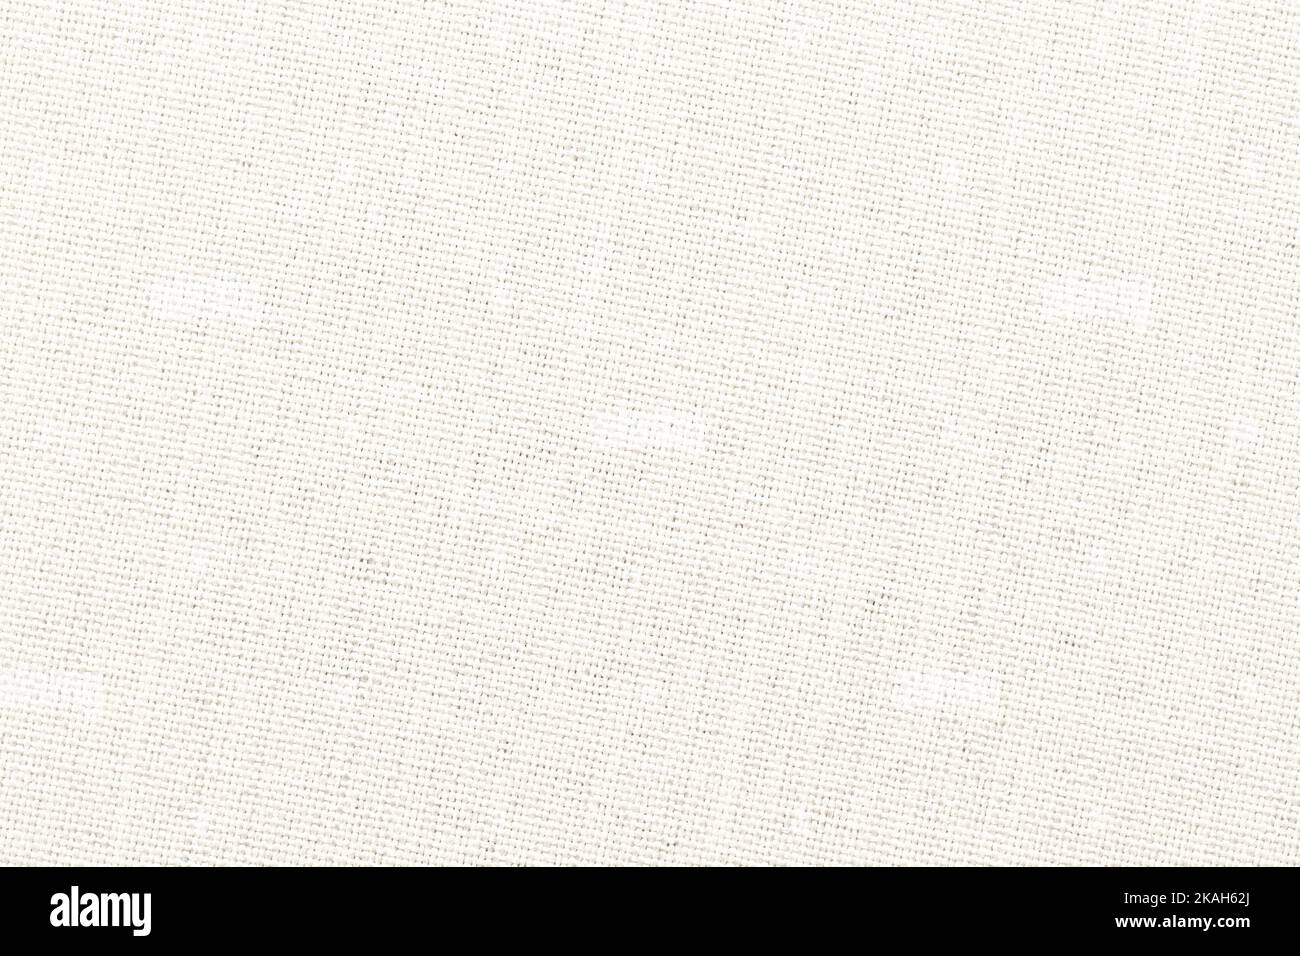 white texture of cotton fabric, natural linen background Stock Photo